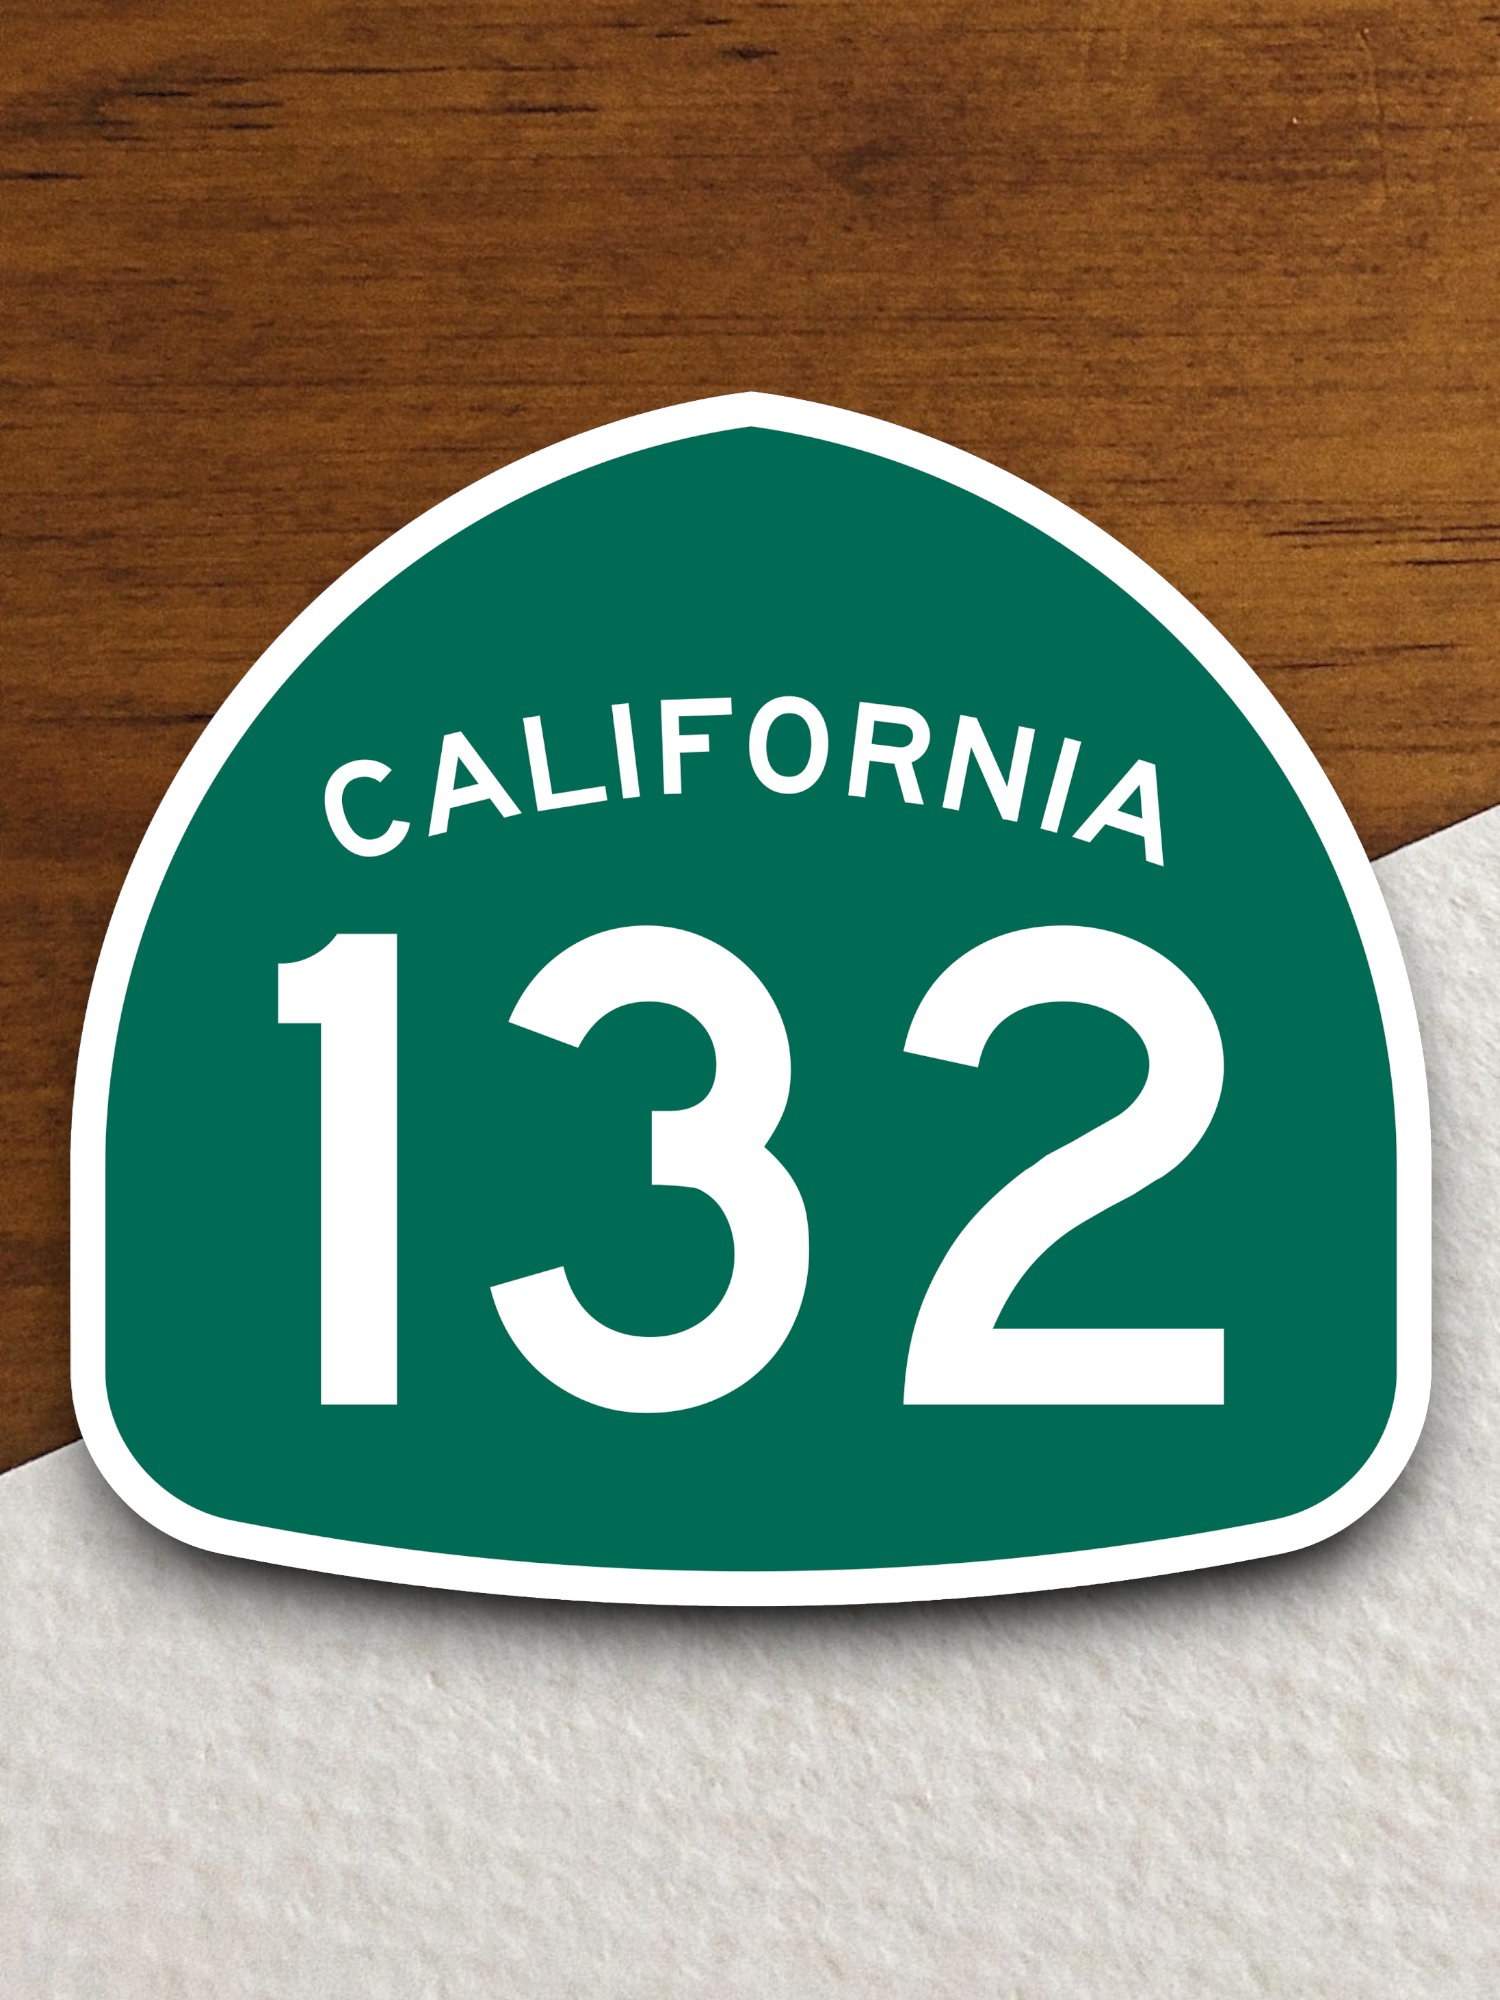 California State Route 132 Road Sign Sticker